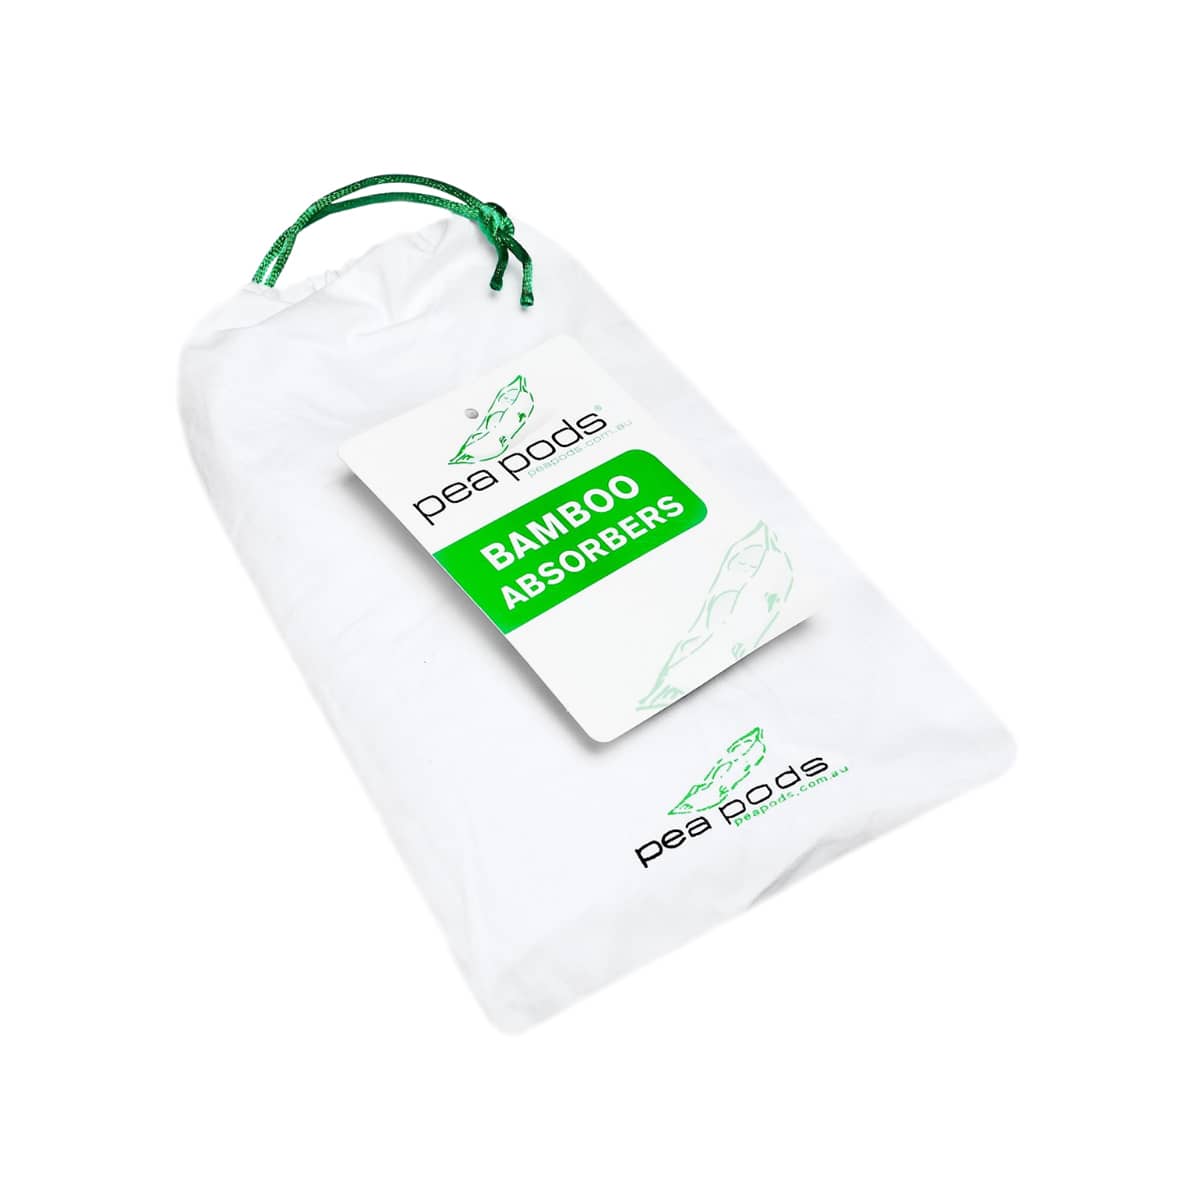 Pea Pods One Size Reusable Nappy - Additional Absorber